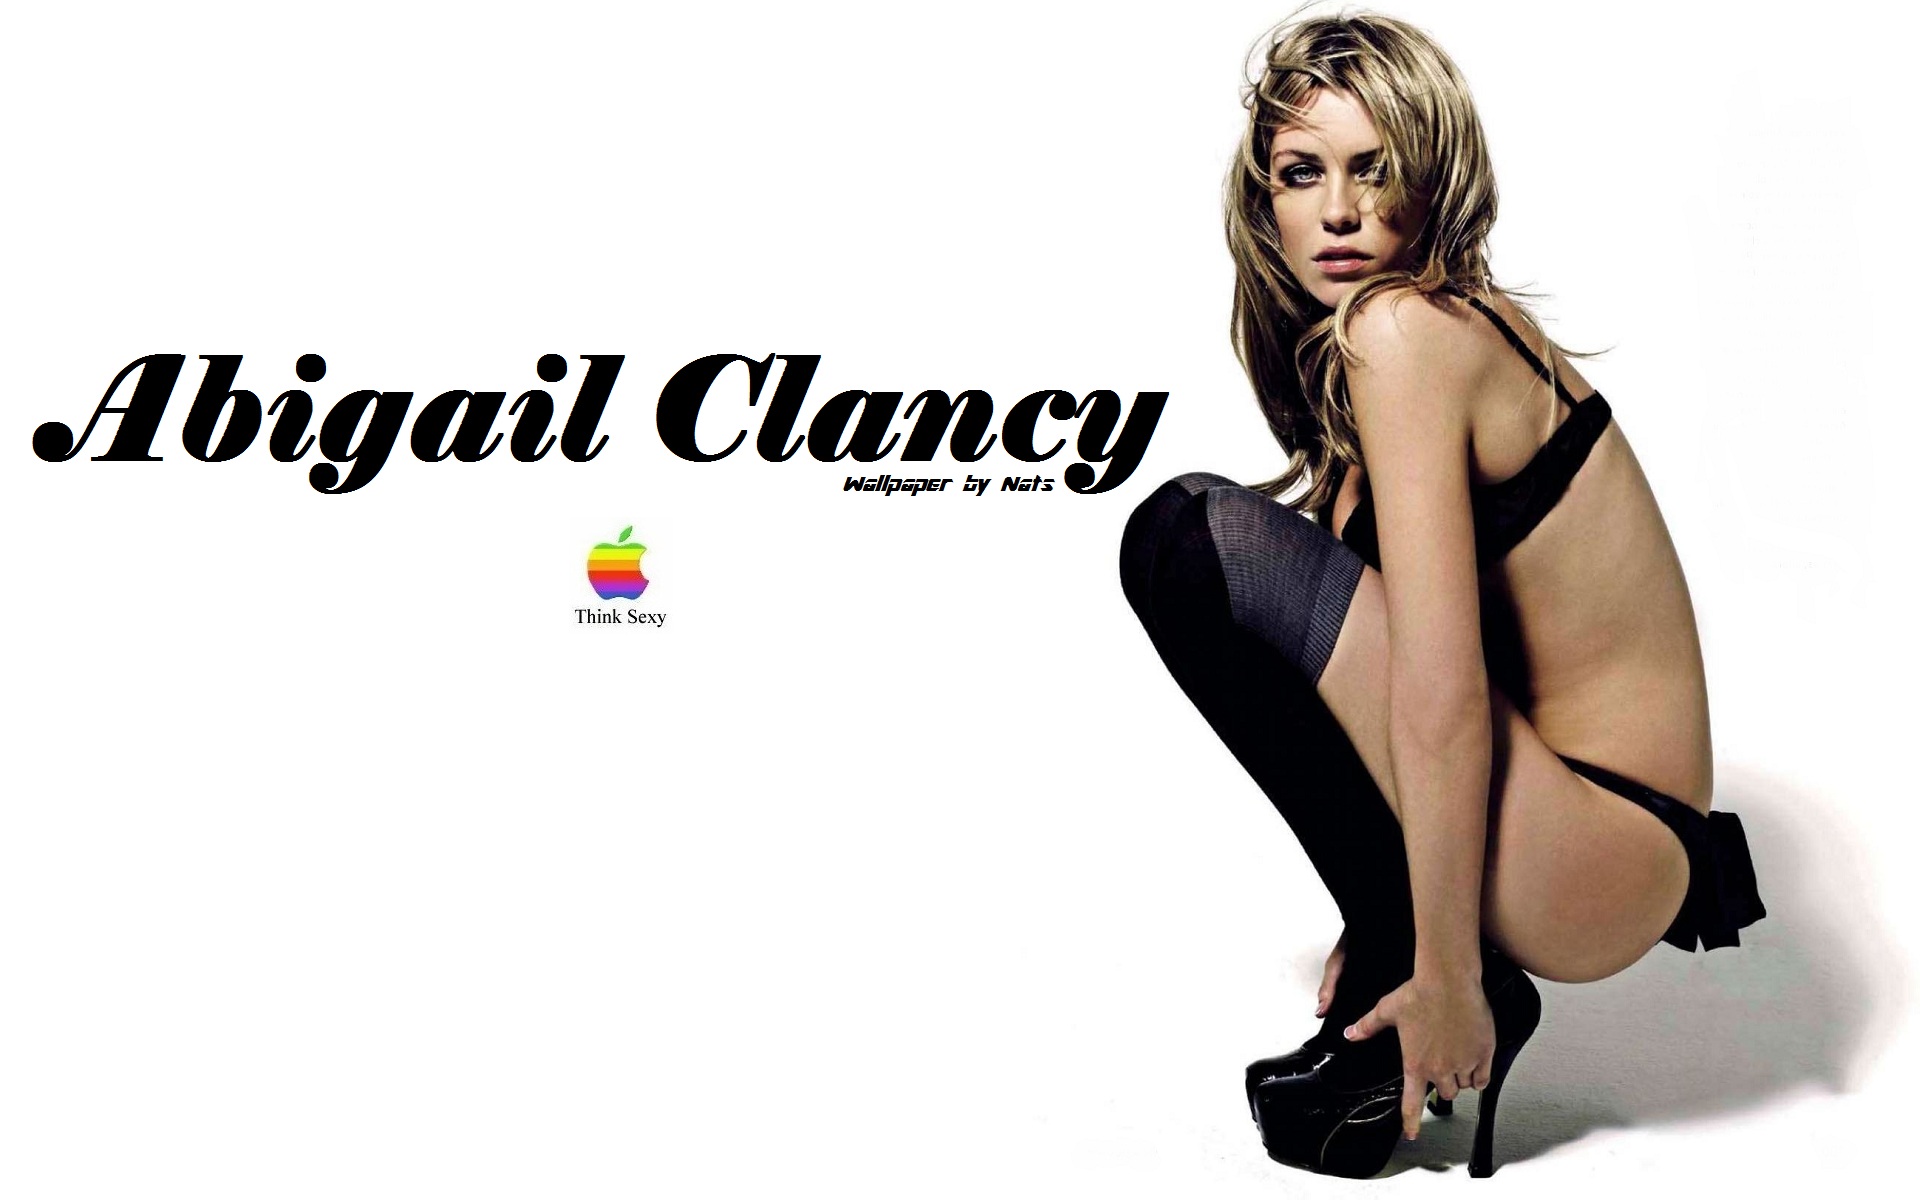 Download High quality Abigail Clancy wallpaper / Celebrities Female / 1920x1200